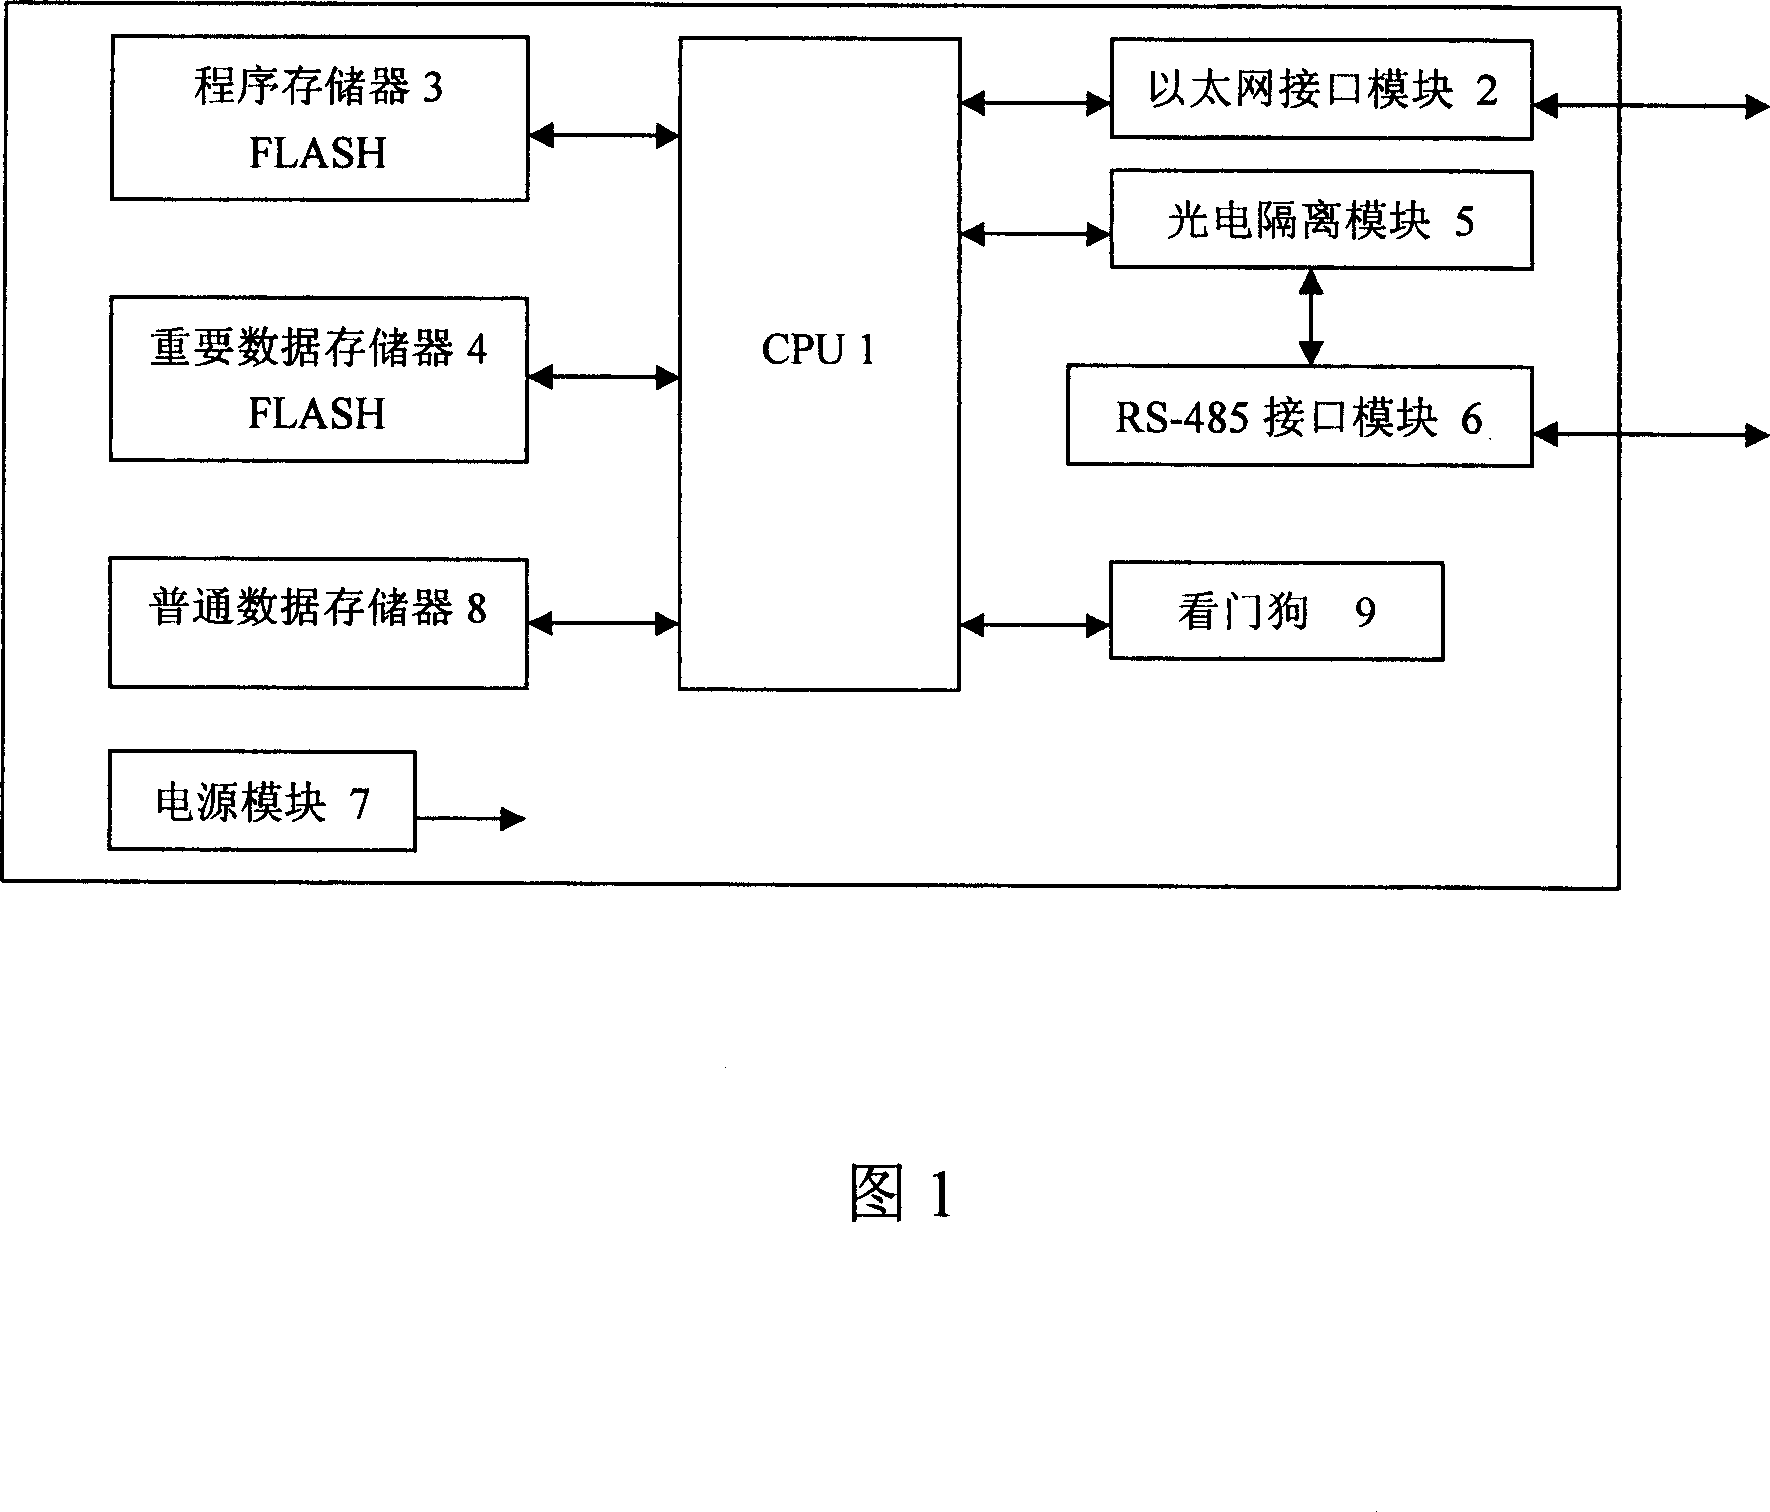 Multiplex communication server in Ethernet and control method